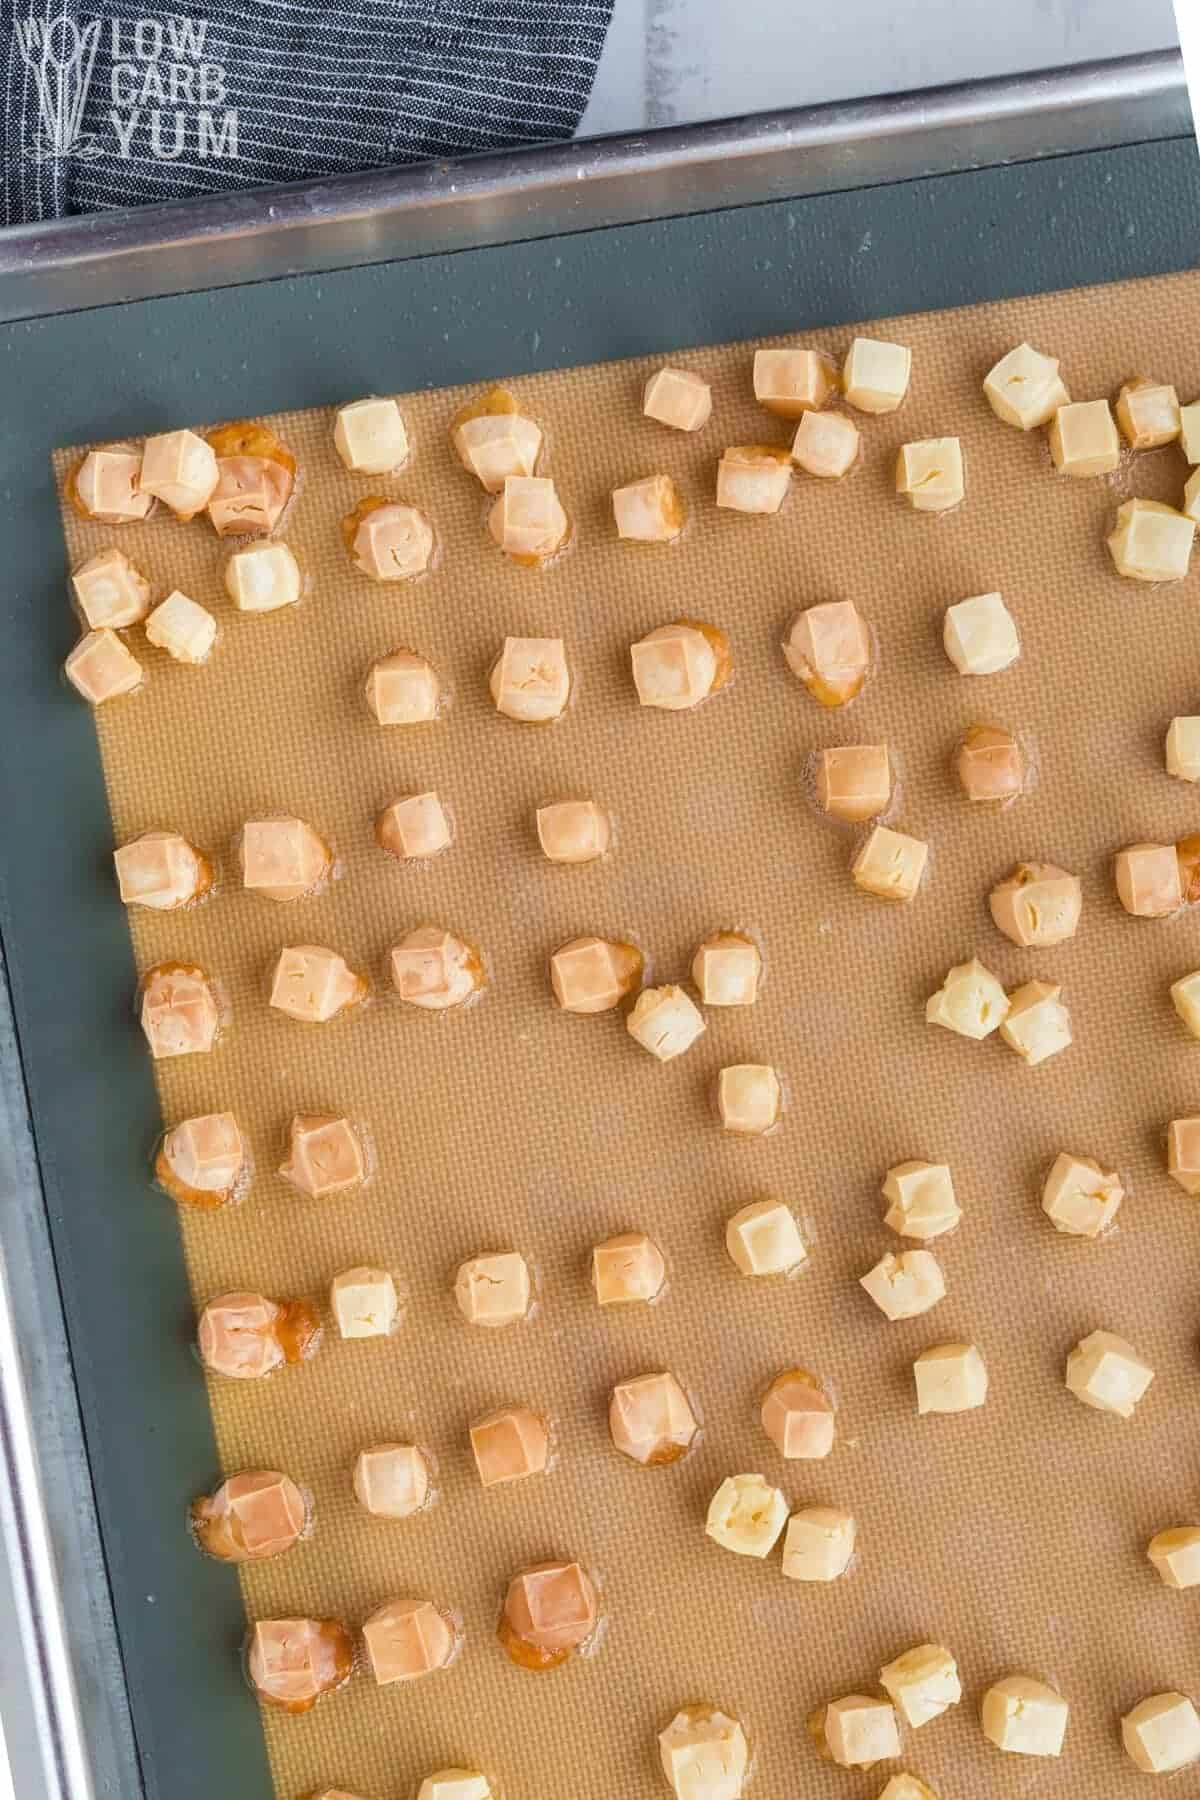 baked cheese cubes after baking on lined sheet pan